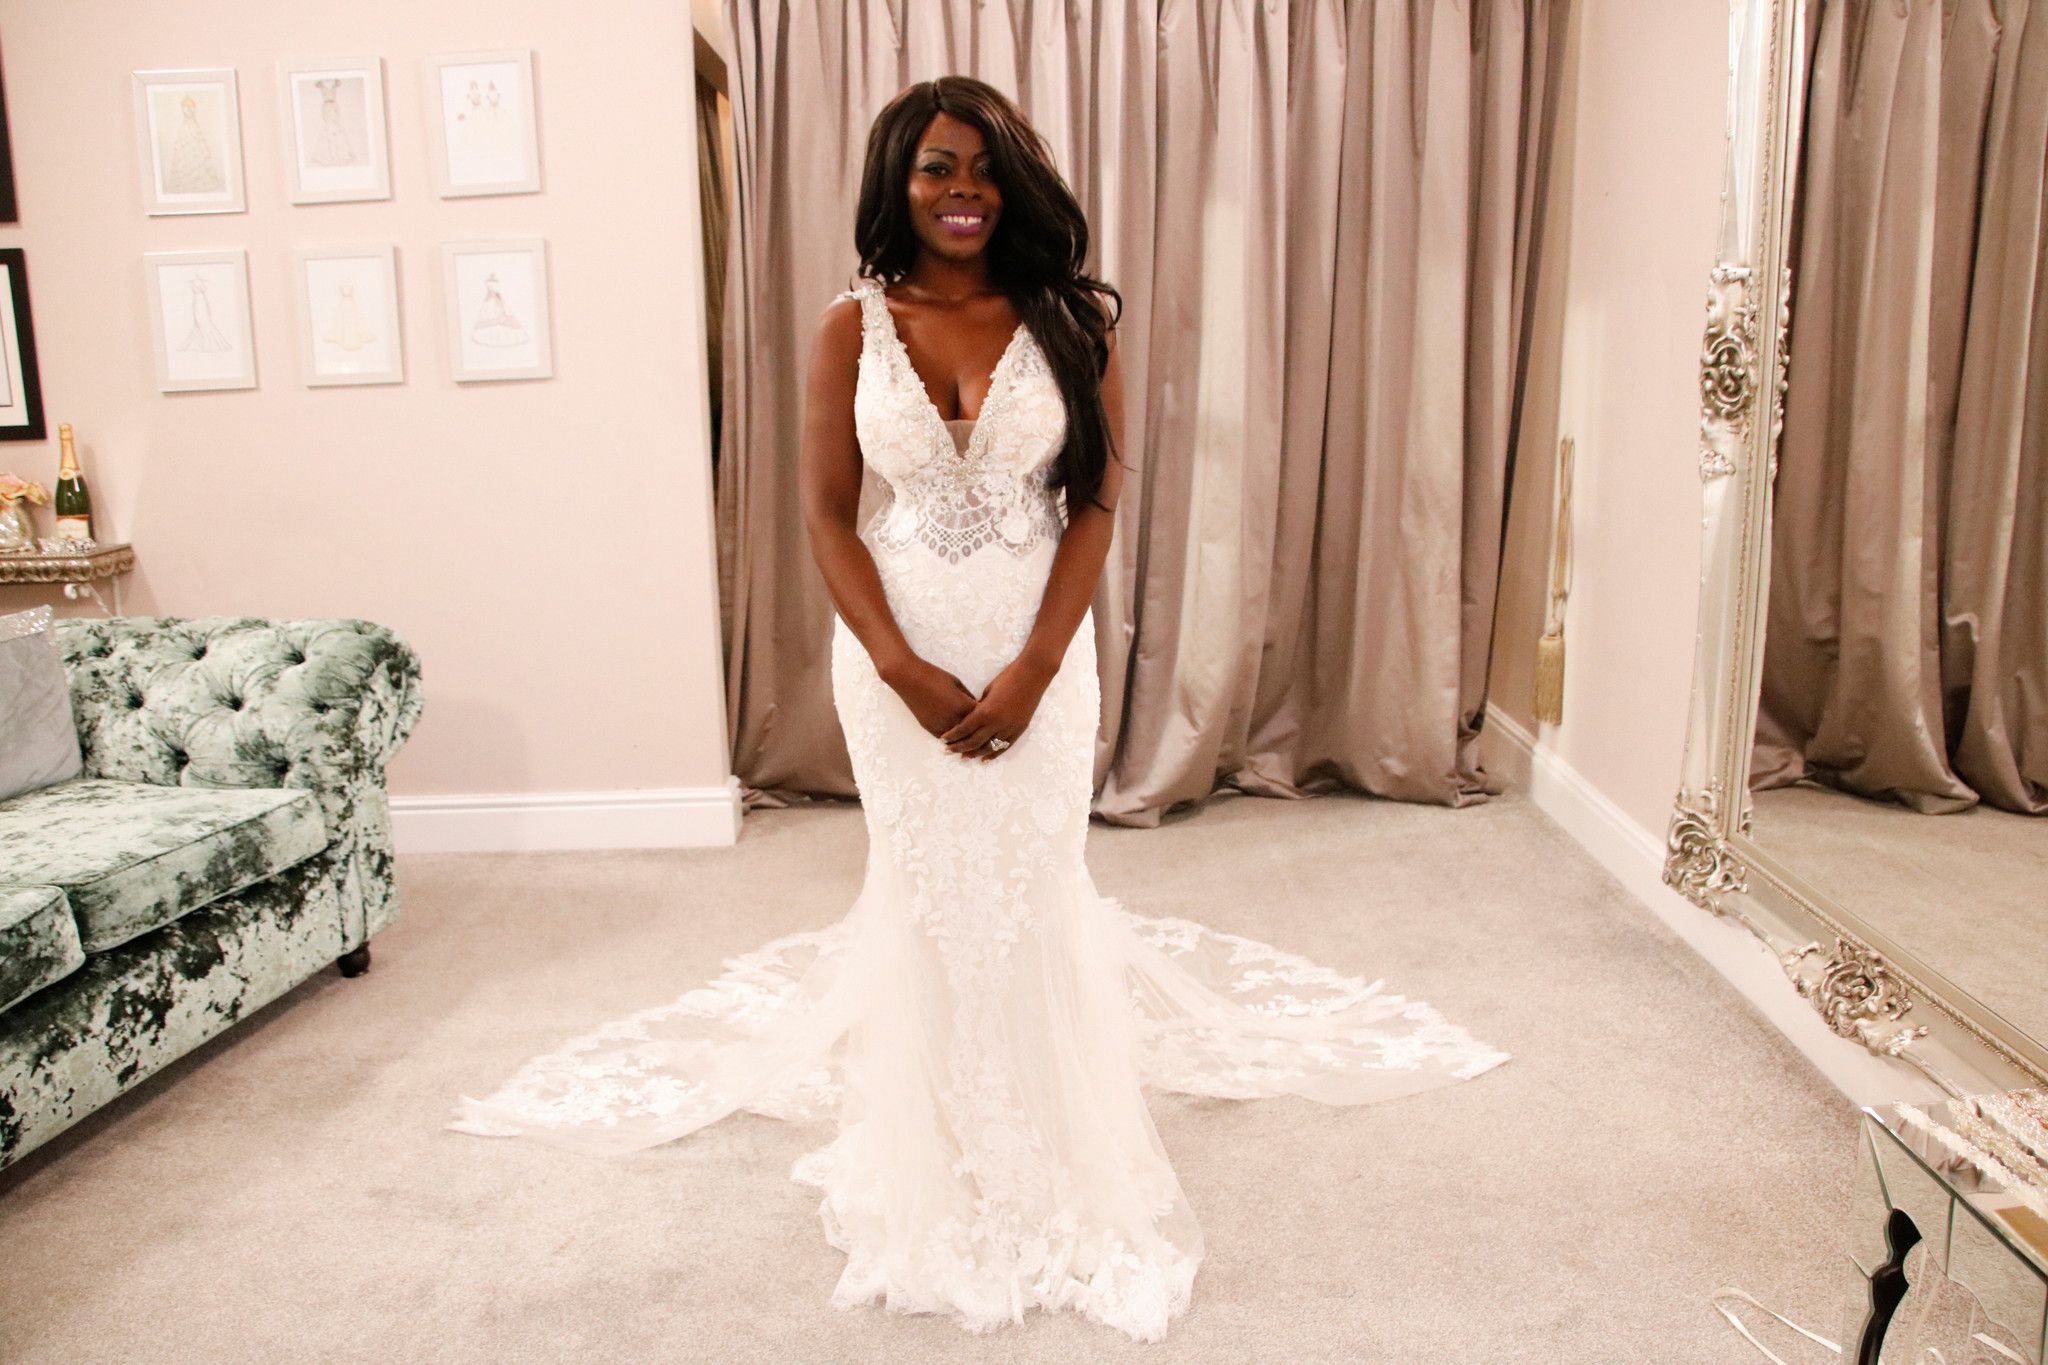 Helen posing in a wedding gown at Kleinfeld's on Say yes To The Dress